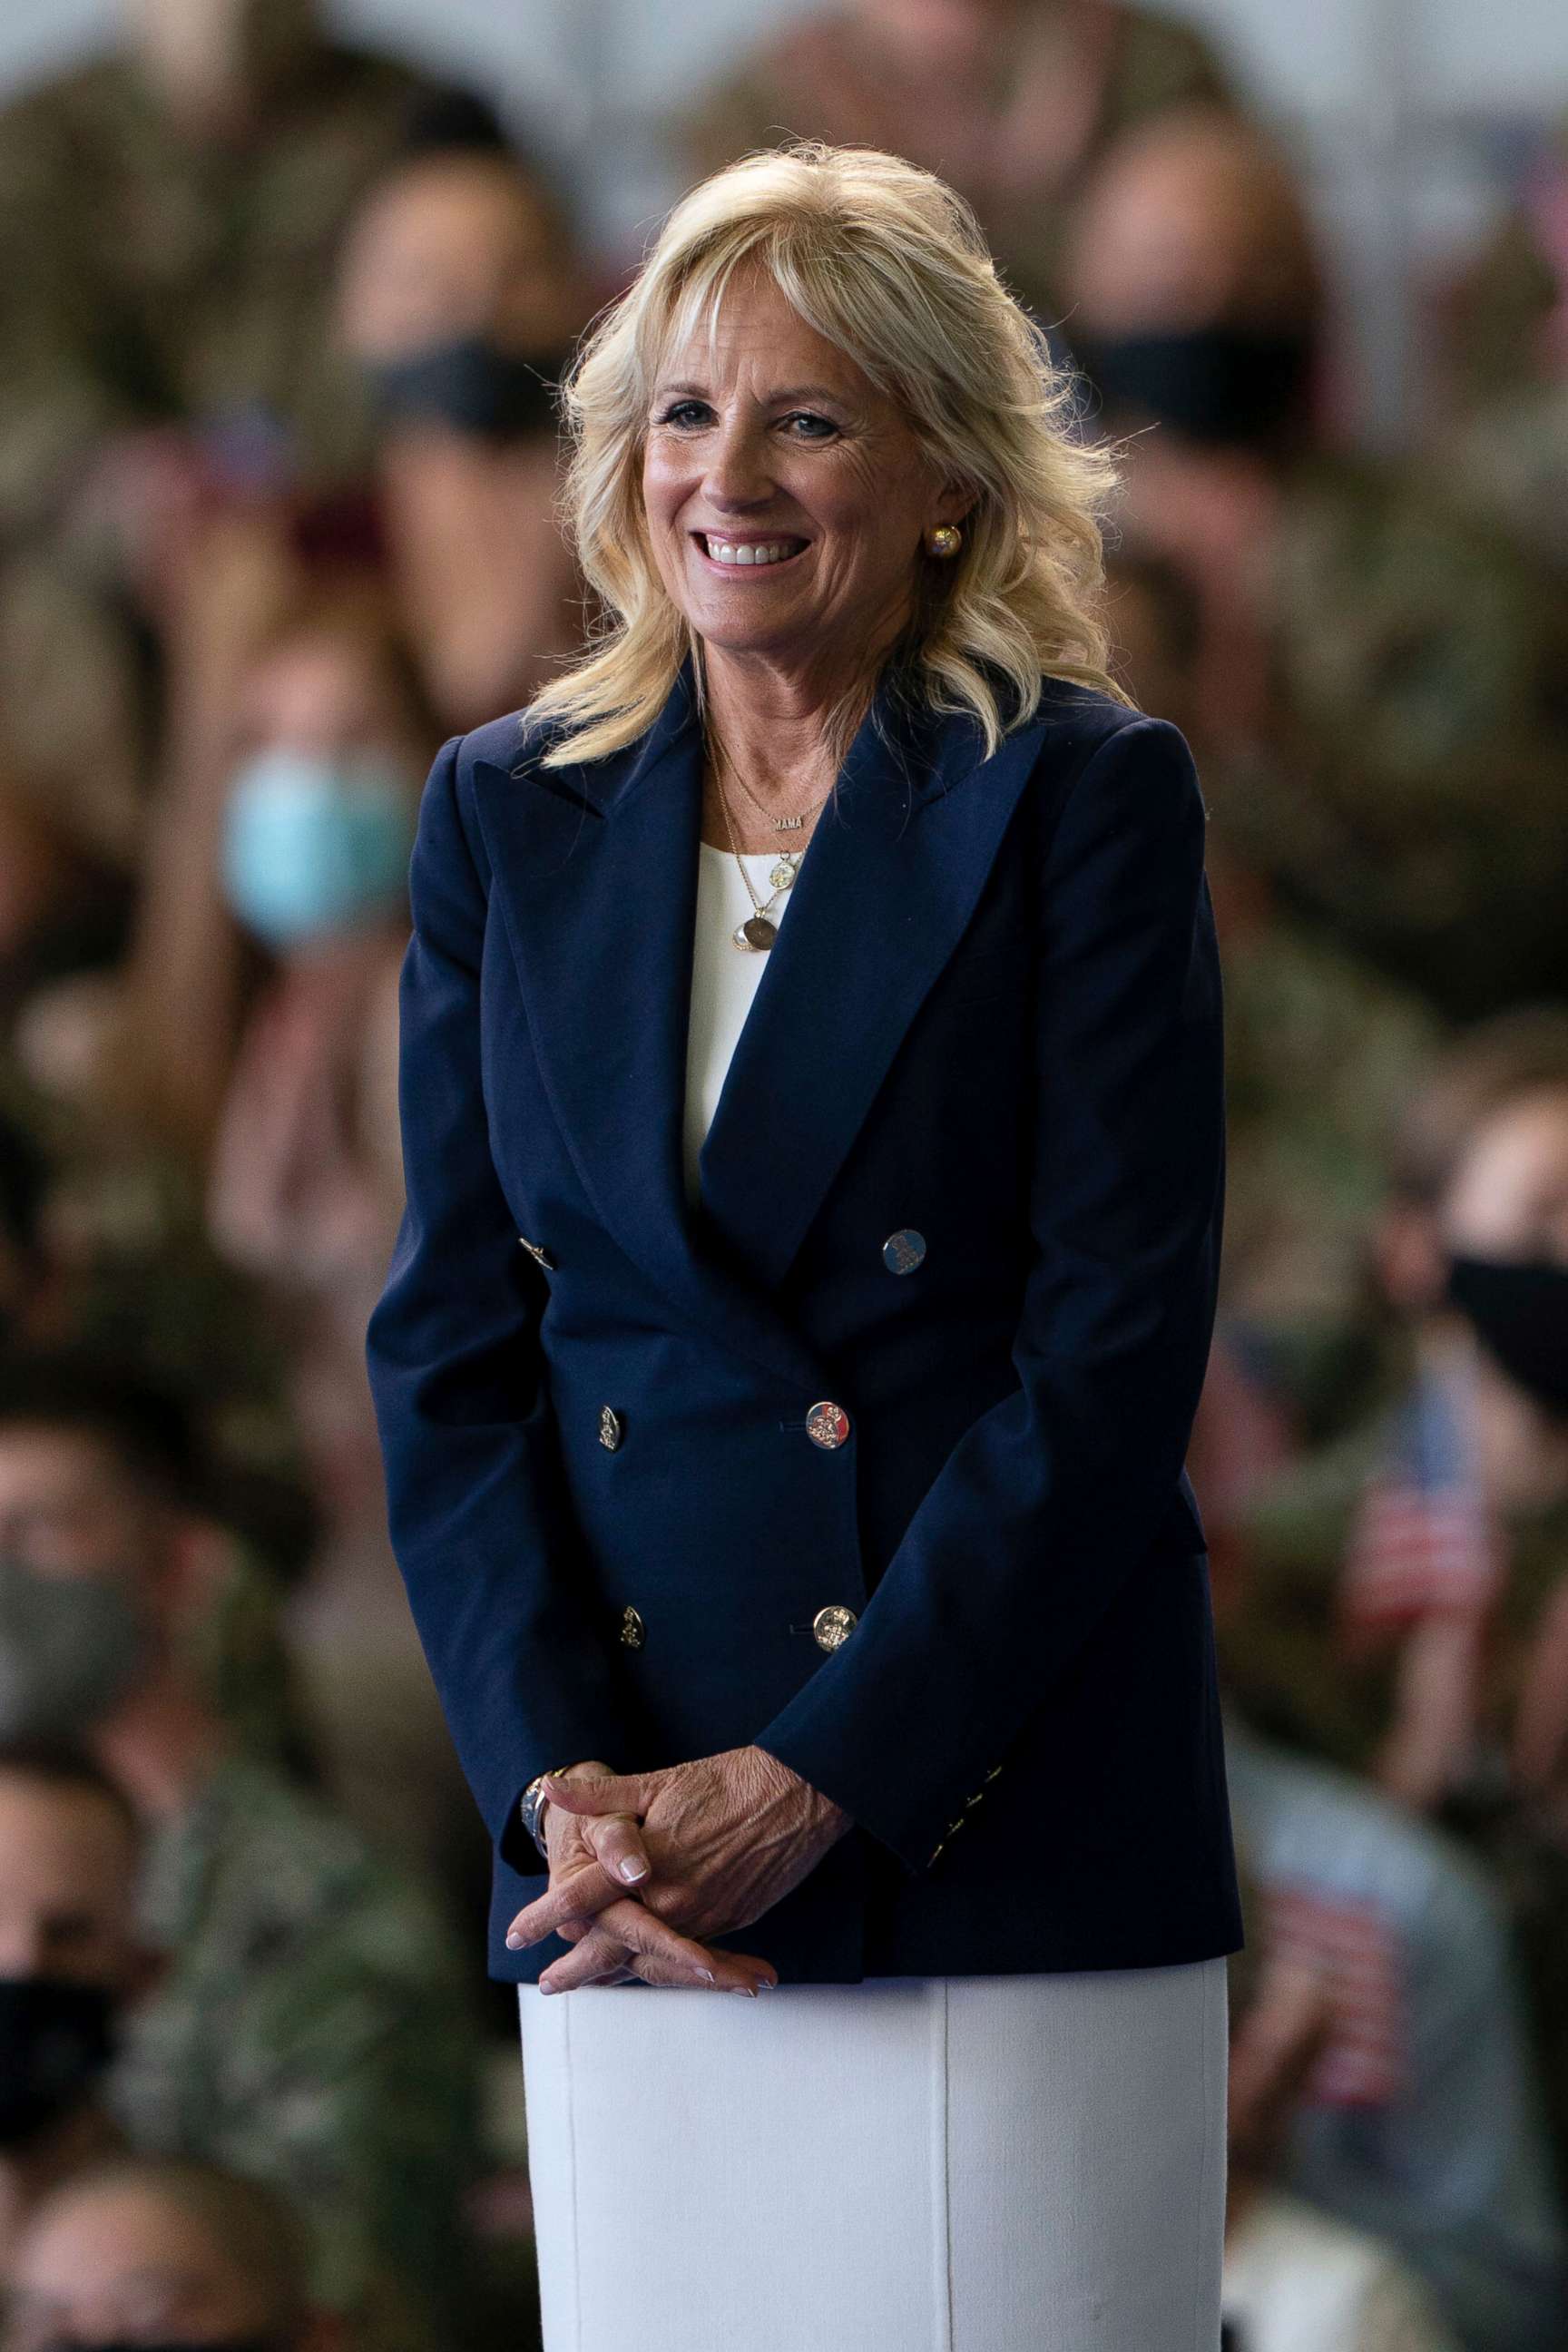 PHOTO: First lady Jill Biden addresses U.S. Air Force personnel at RAF Mildenhall in Suffolk, England, ahead of the G7 summit, June 9, 2021.